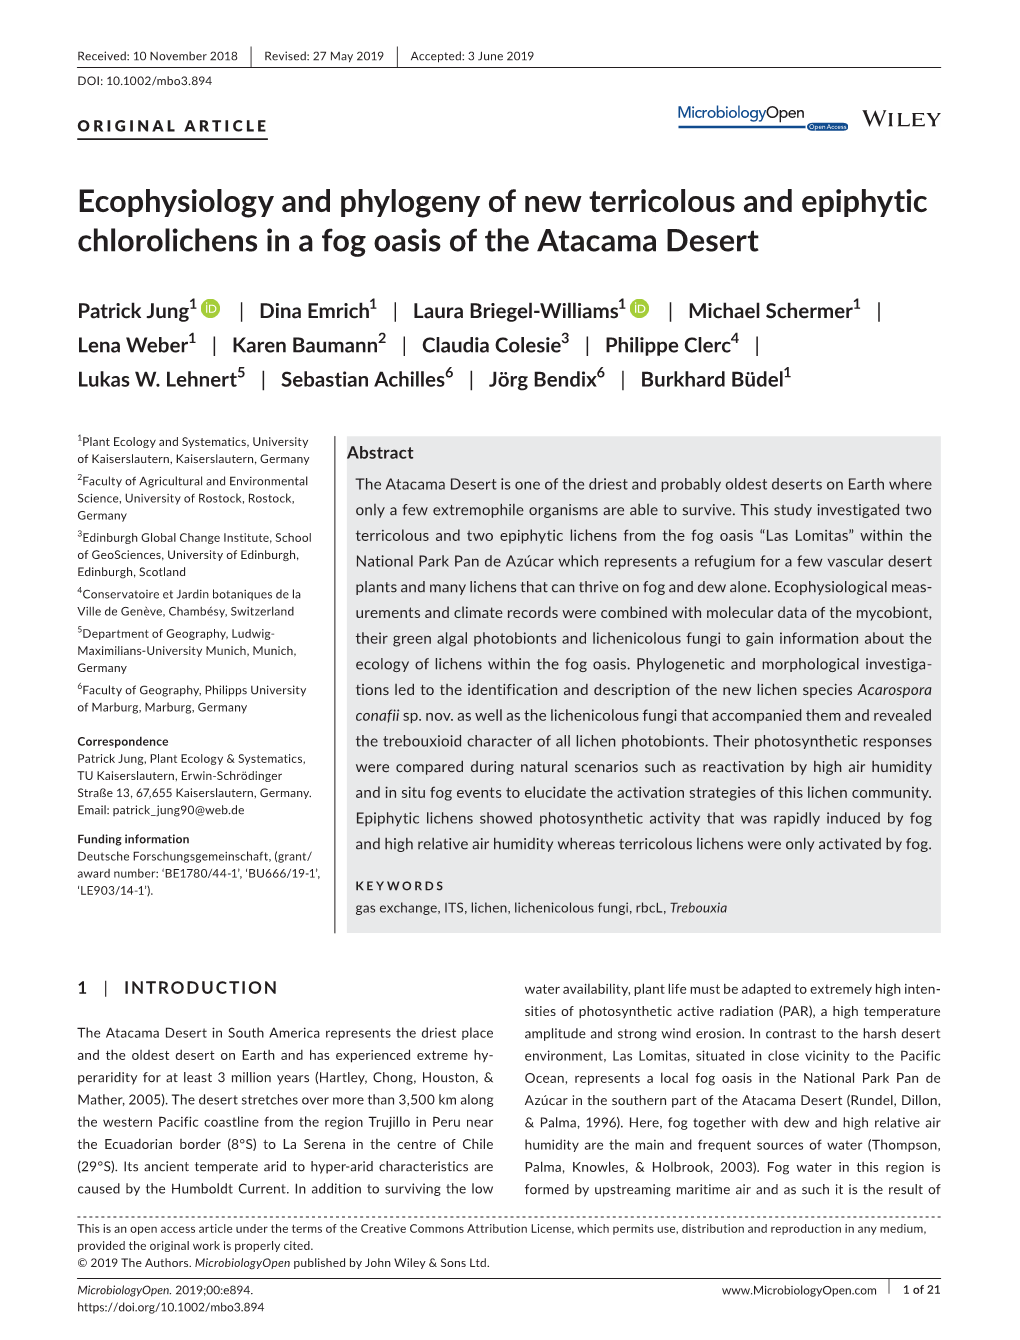 Ecophysiology and Phylogeny of New Terricolous and Epiphytic Chlorolichens in a Fog Oasis of the Atacama Desert